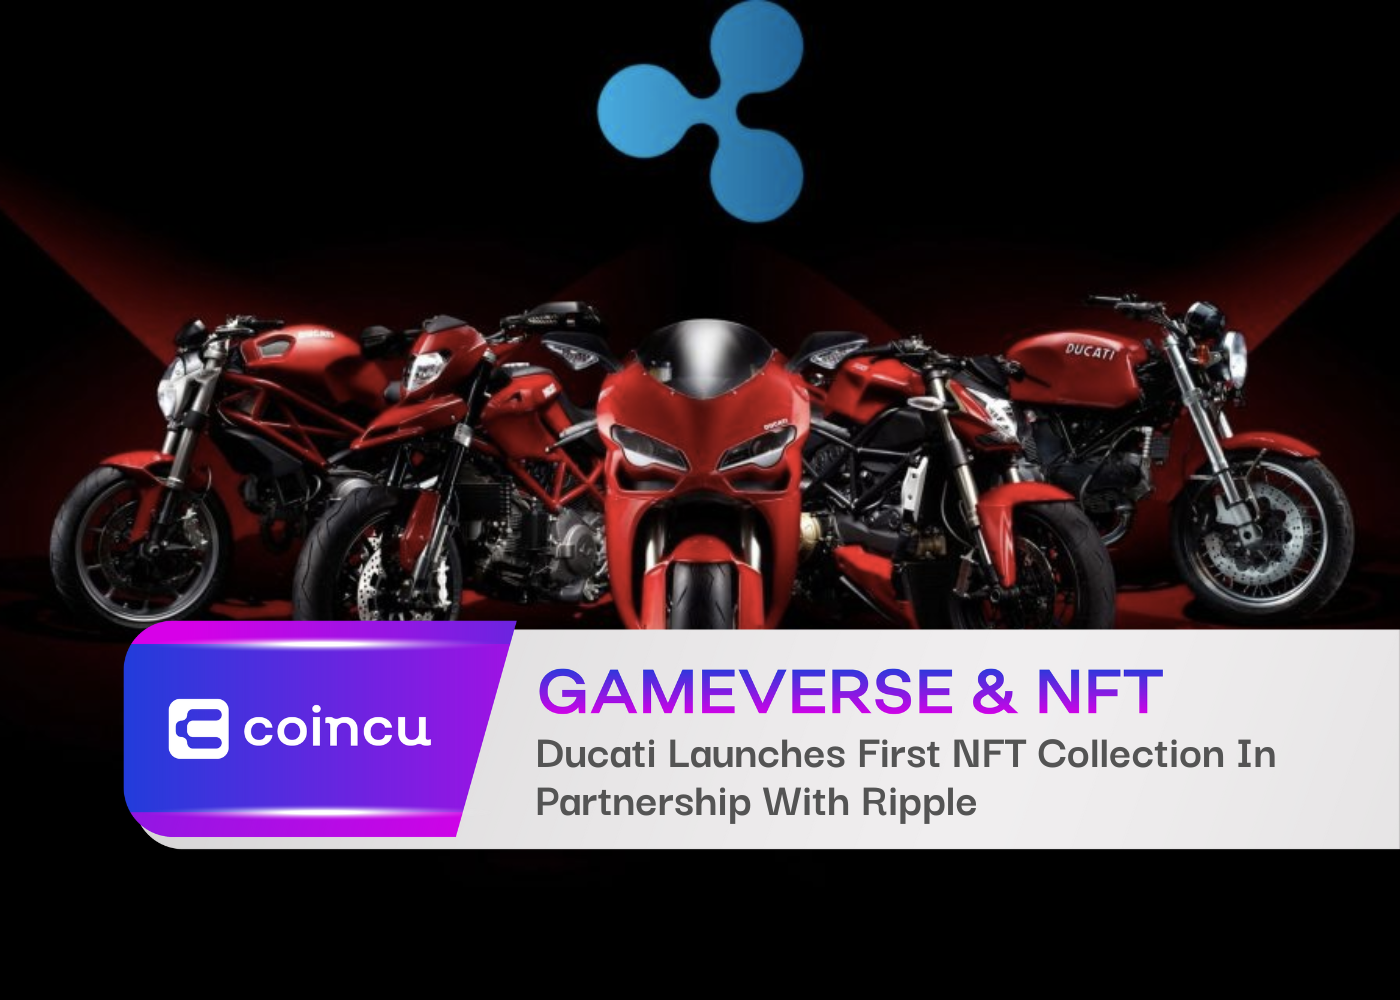 Ducati Launches First NFT Collection In Partnership With Ripple